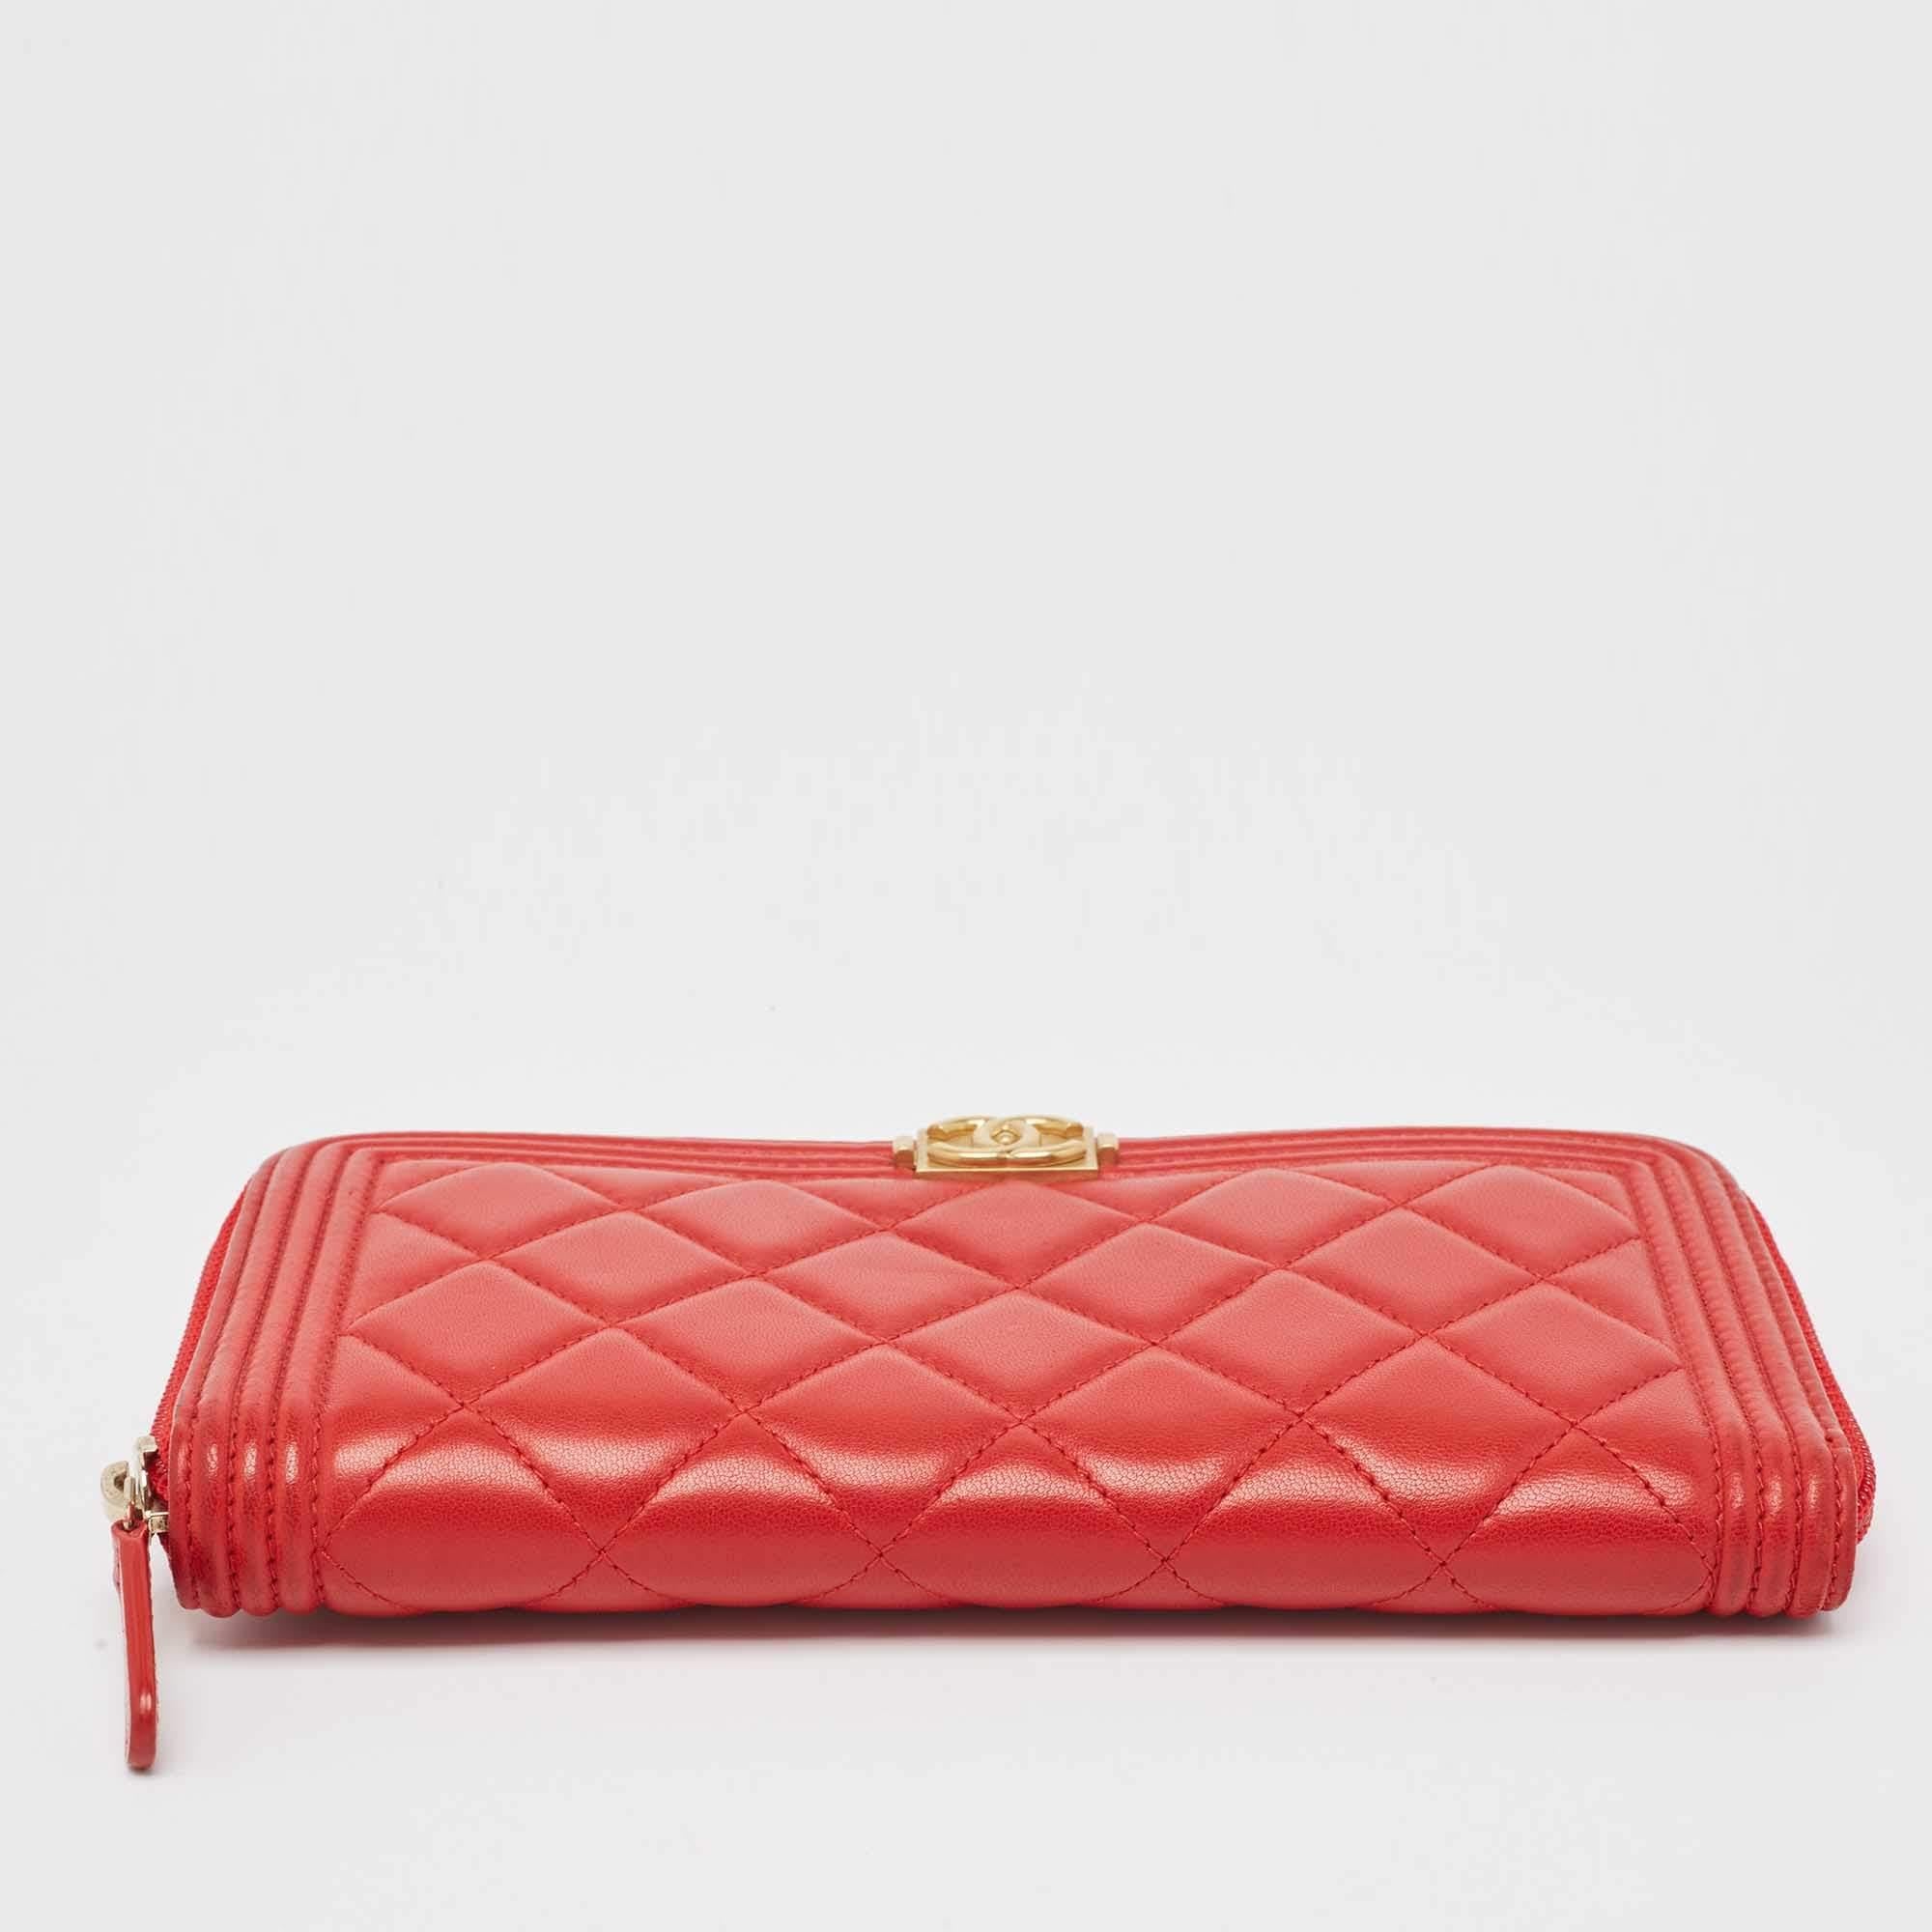 Chanel Red Quilted Leather Boy Zip Around Wallet For Sale 5